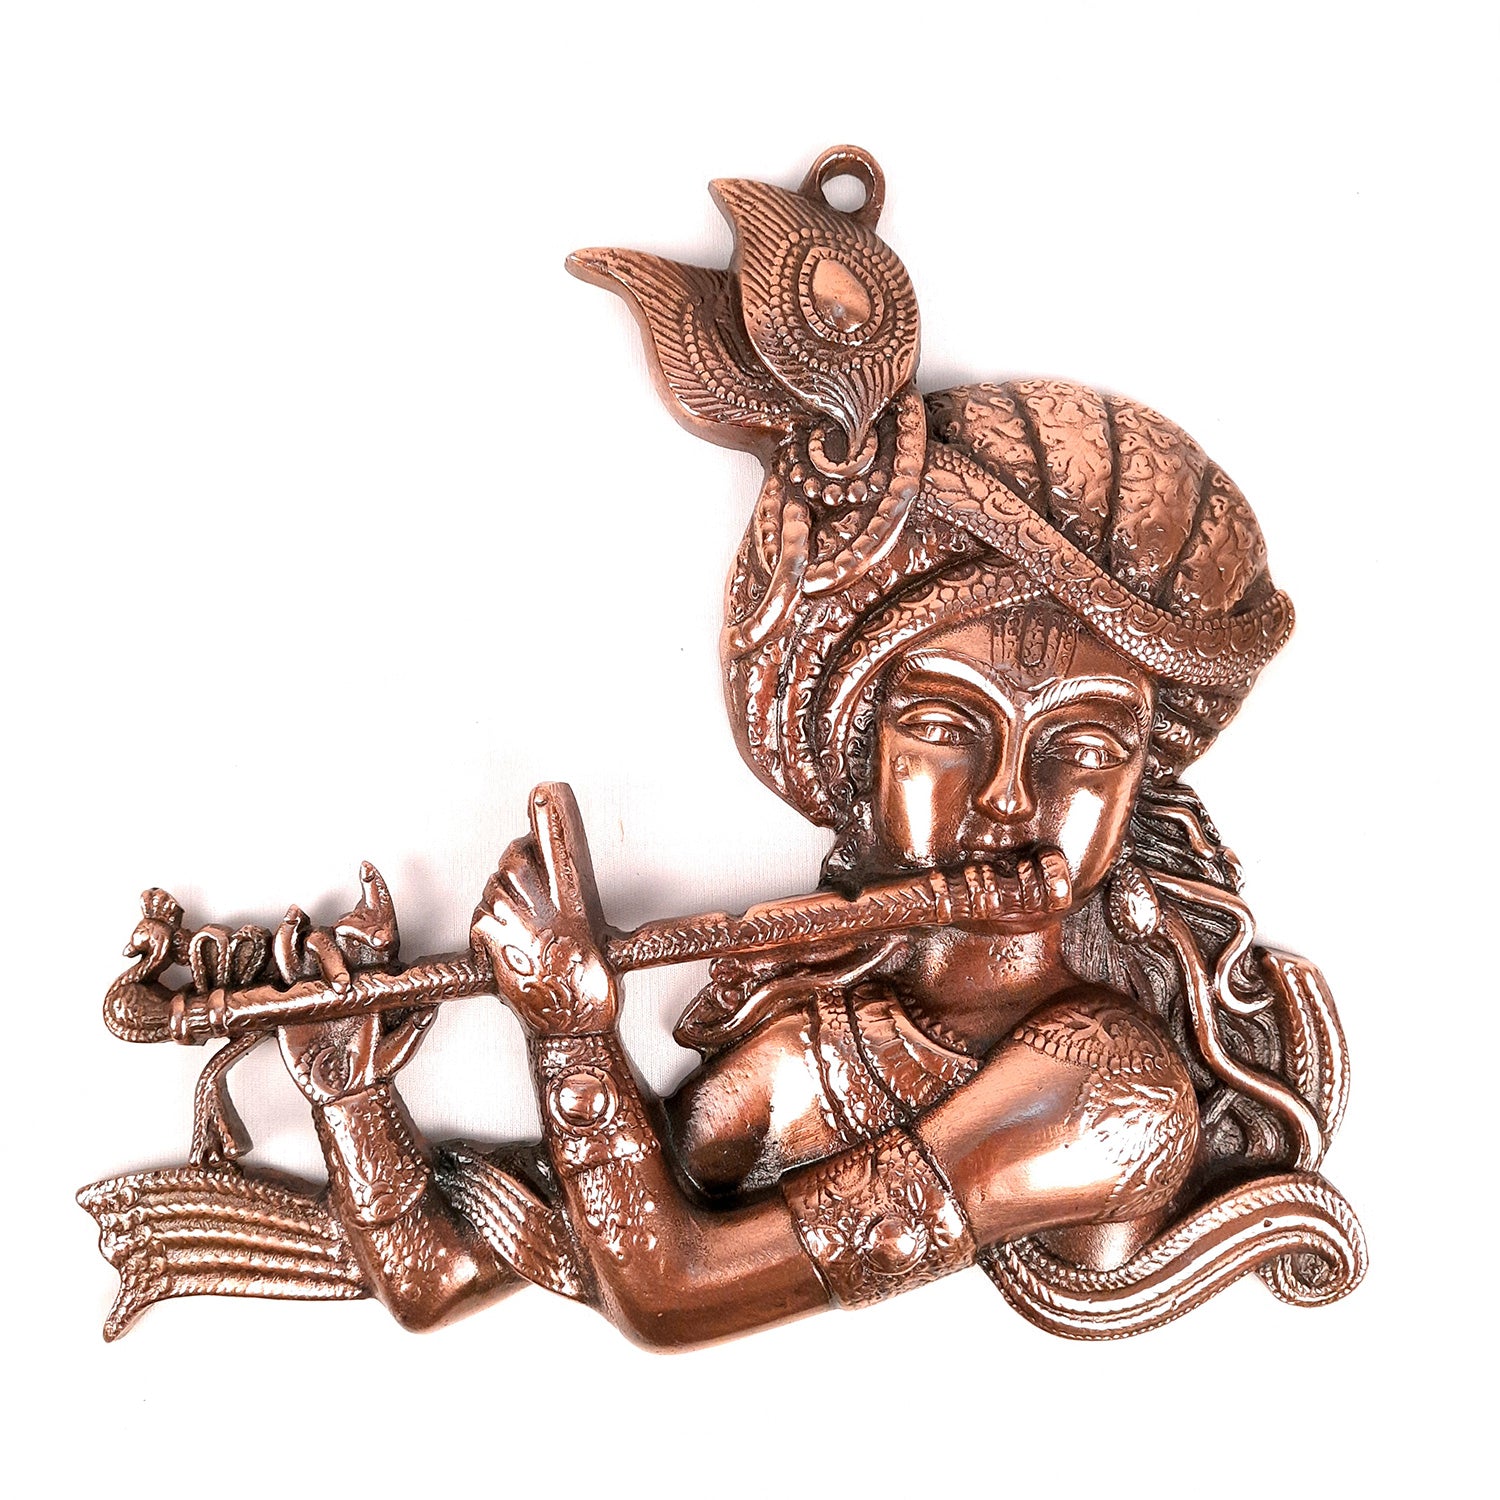 Shri Krishna Wall Hanging Idol | Lord Krishna Playing Flute Wall Hanging Statue Murti | Religious & Spiritual Art Sculpture - for Gift, Home, Living Room, Office, Puja Room Decoration - 11 Inch - Apkamart